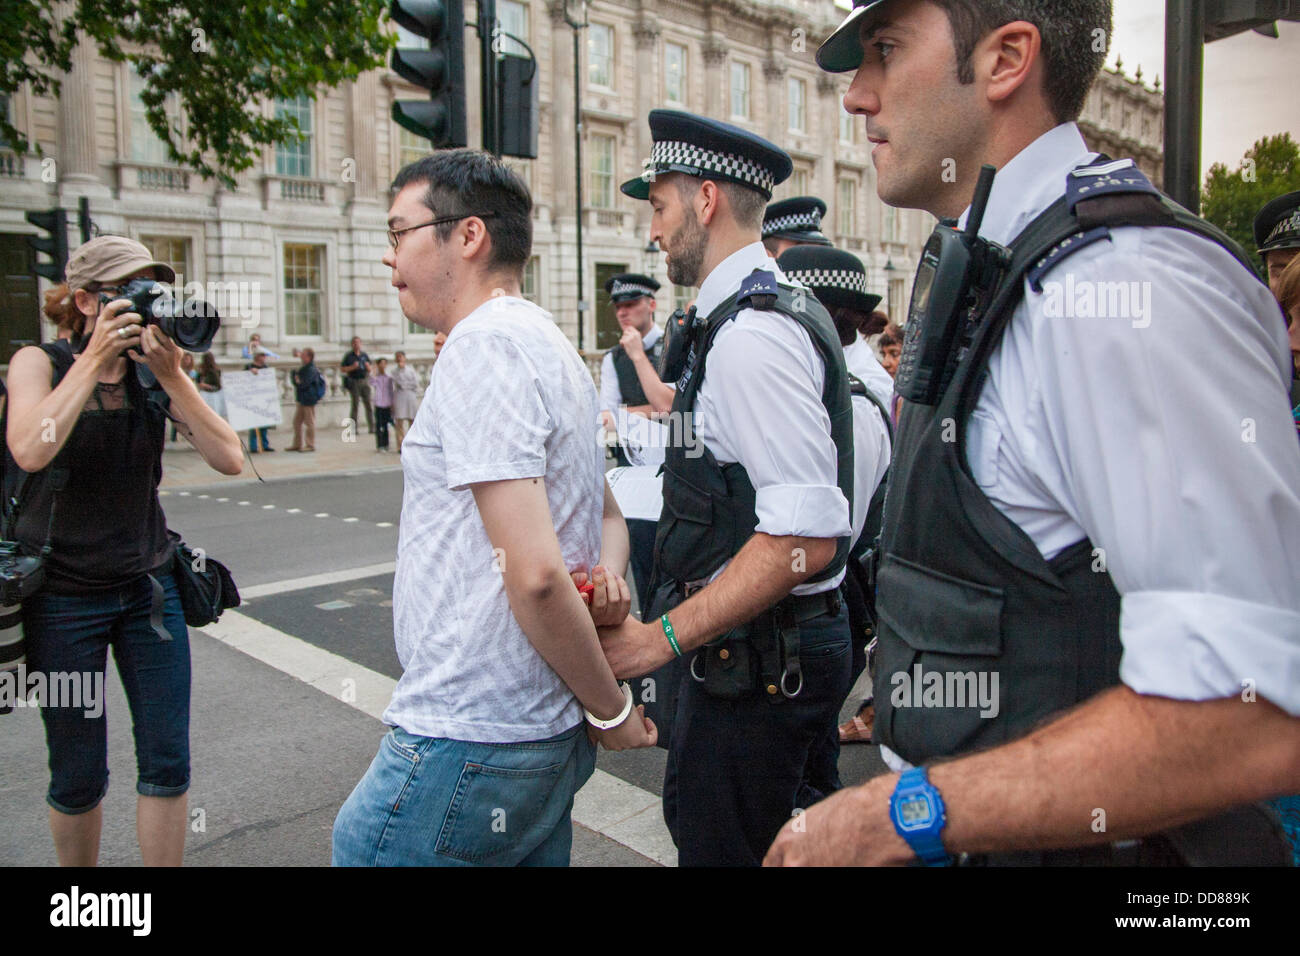 London, UK. 28th Aug, 2013. After refusing to move from Whitehall, and activist is led away by police during a protest against possible intervention by the UK in the ongoing Syrian conflict following chemical weapons attacks, Blamed on the Assad regime, on civilians. Credit:  Paul Davey/Alamy Live News Stock Photo